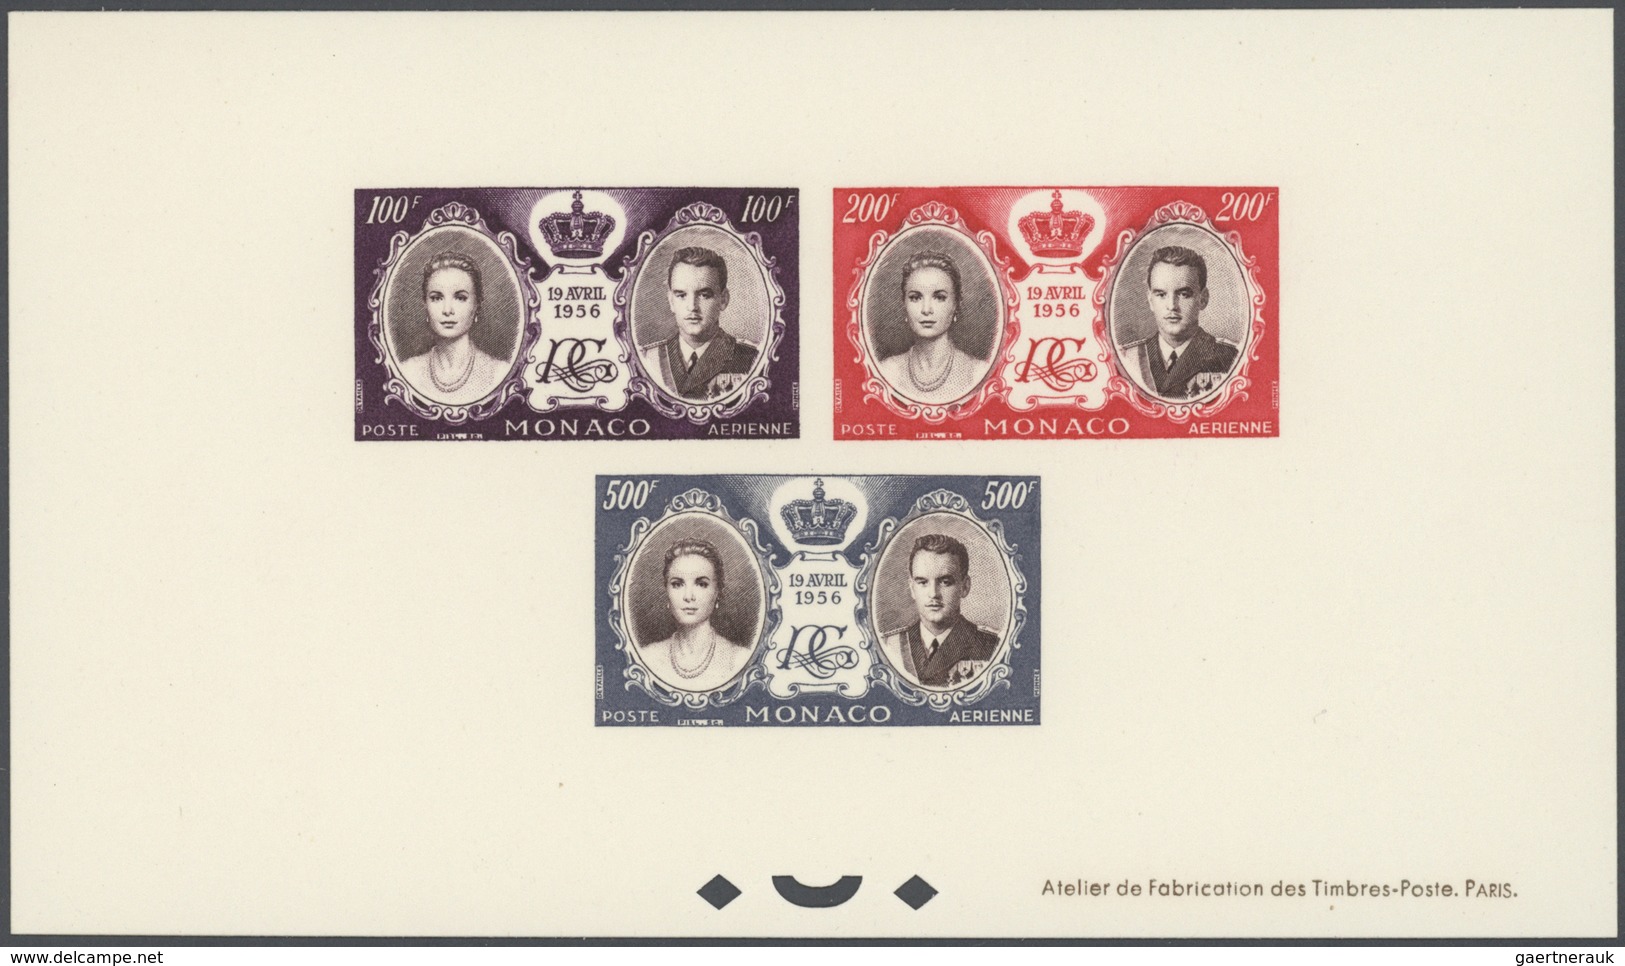 27376 Monaco: 1956, Royal Wedding, Presentation Book comprising a mint and a used set, both bloc specieux